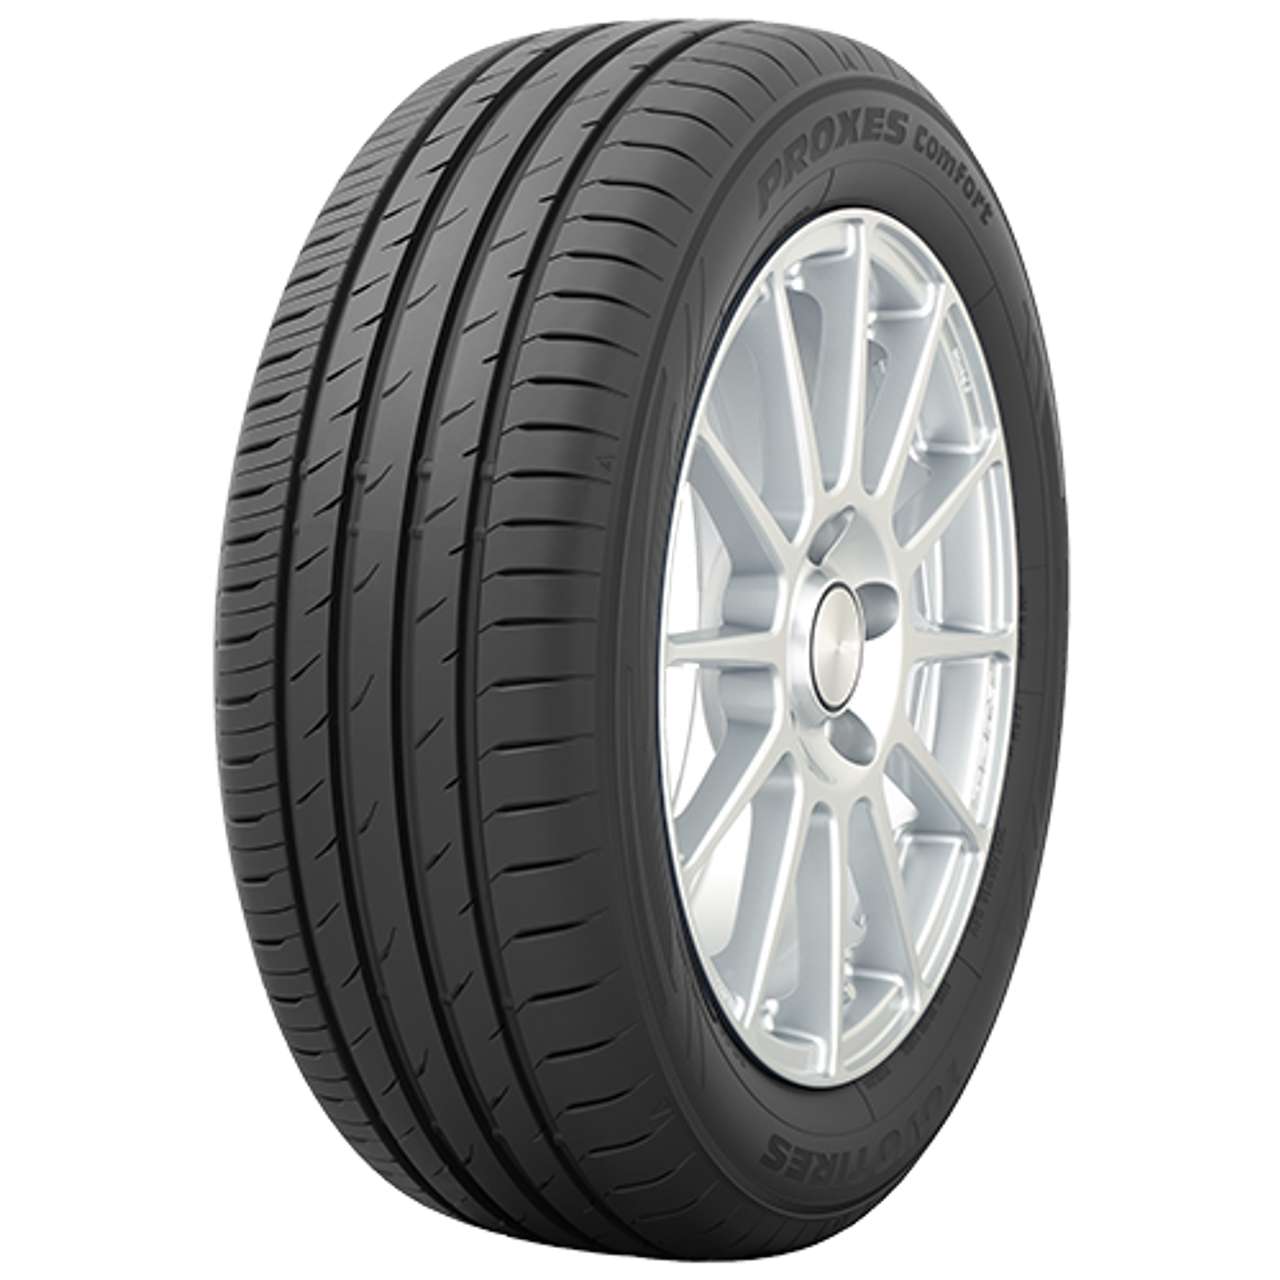 TOYO PROXES COMFORT SUV 215/55R18 99V BSW